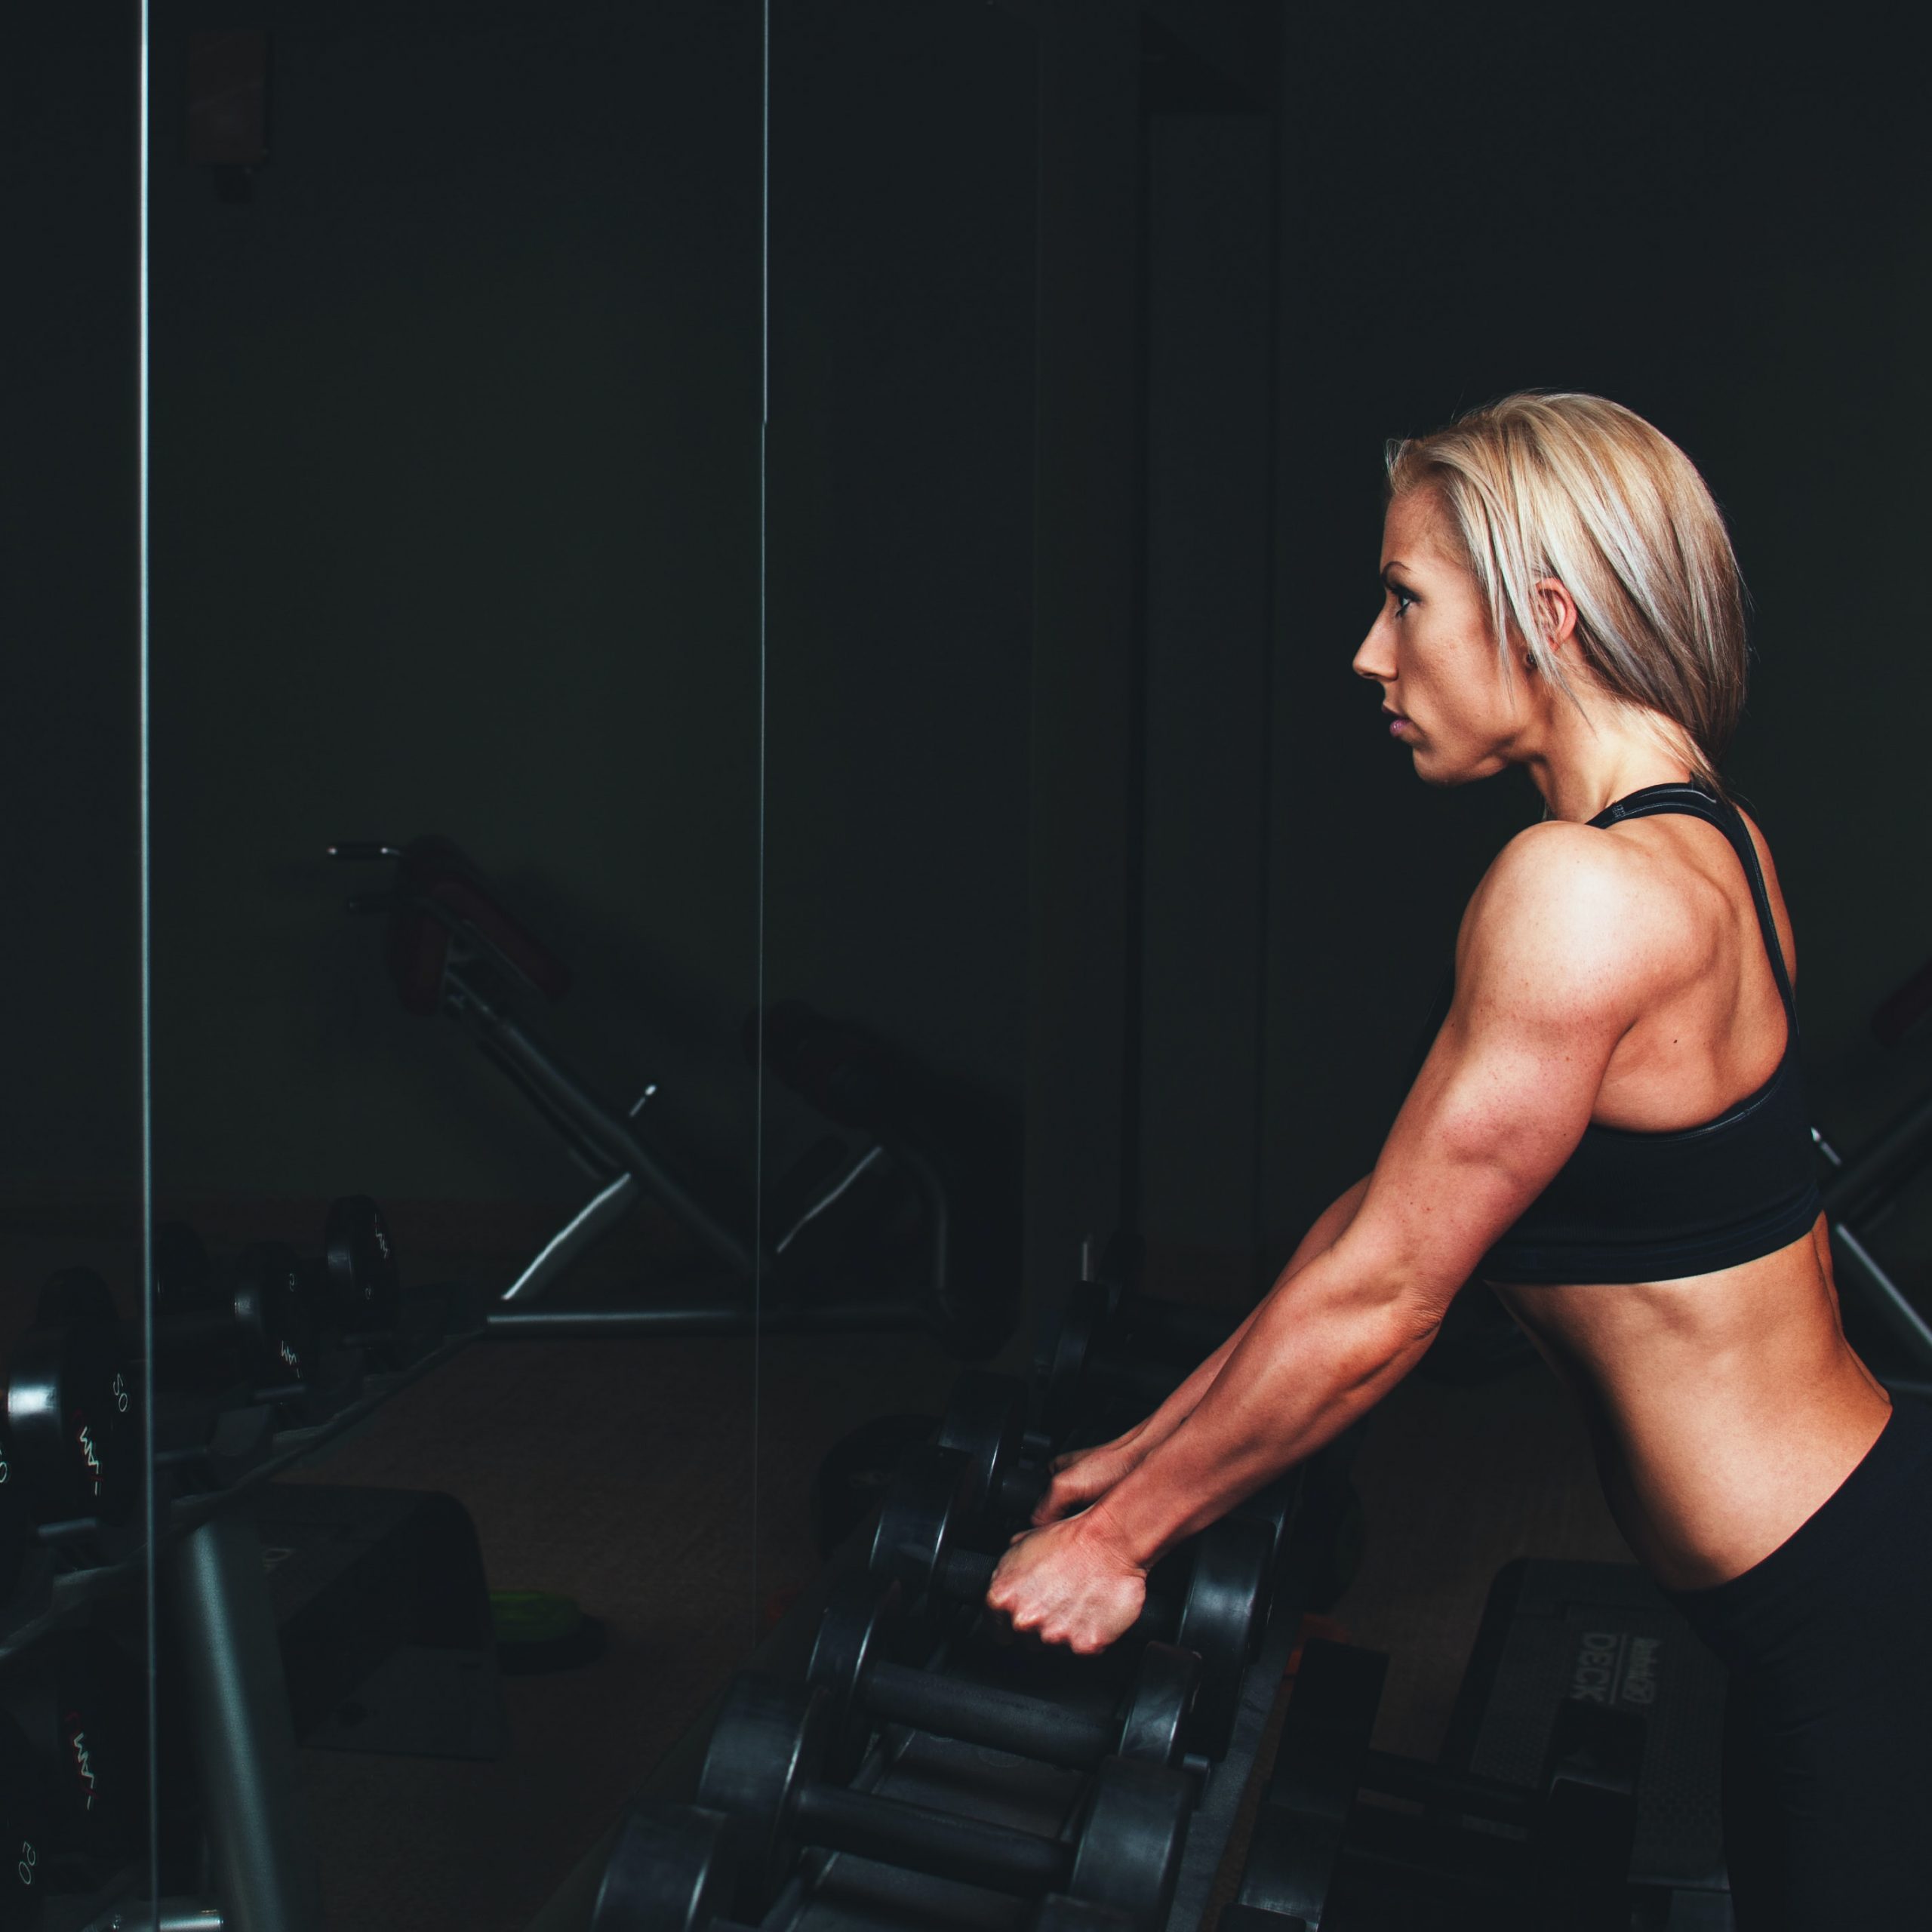 A woman blond in her thirties is taking dumbbells to be fit and strong